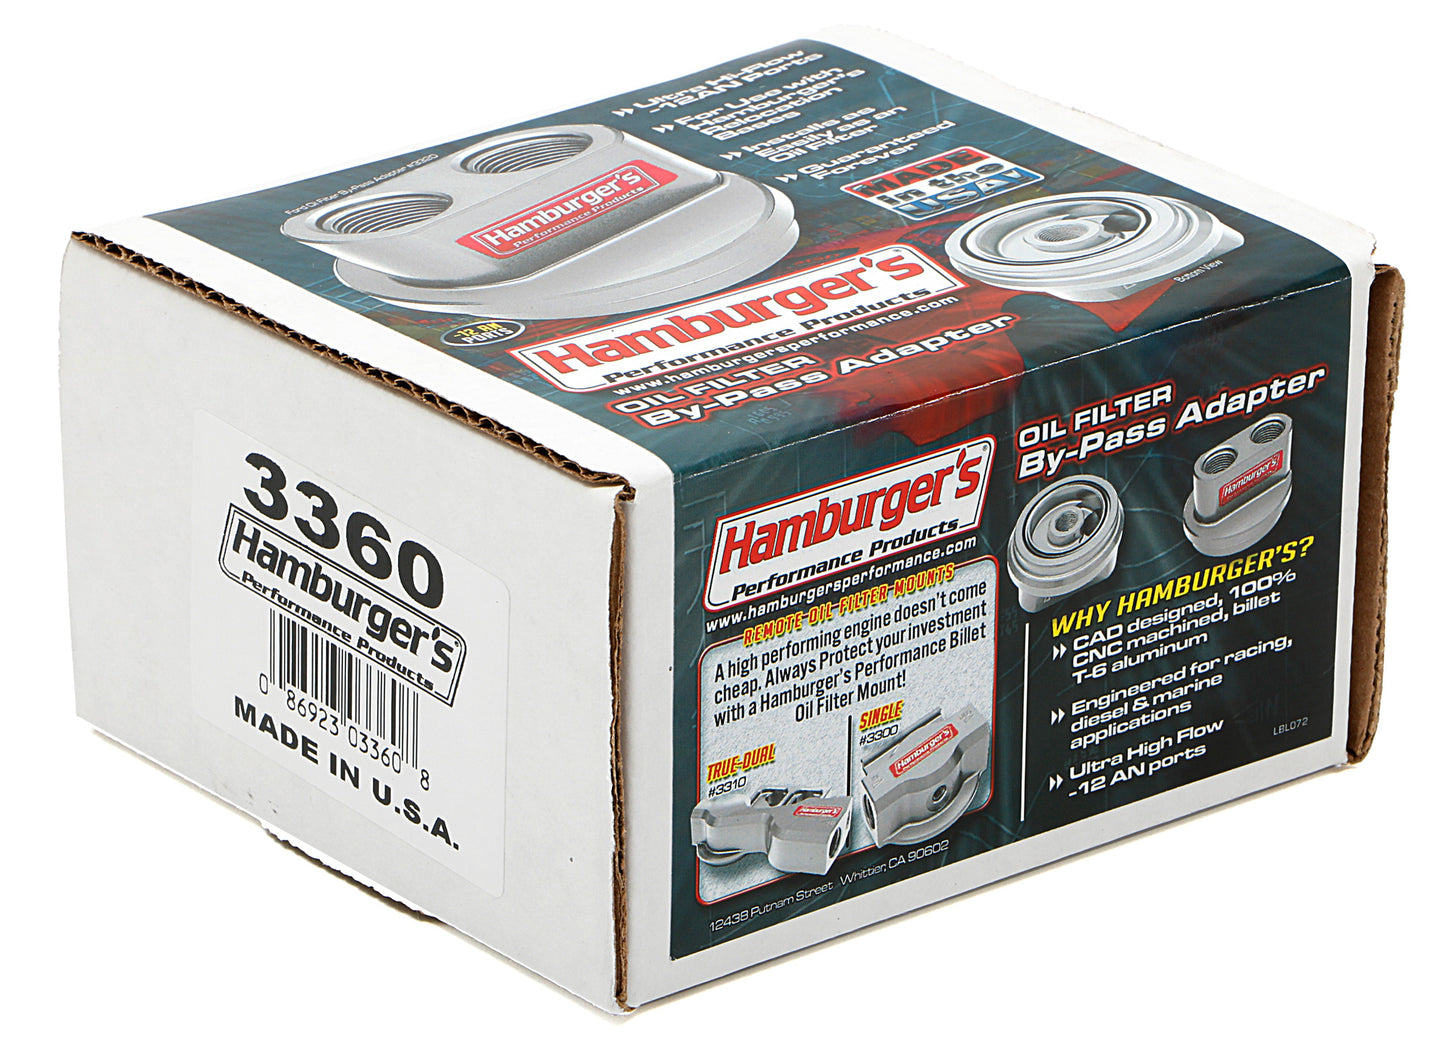 HAMBURGER'S PERFORMANCE PRODUCTS SPIN-ON OIL FILTER BYPASS ADAPTER; -12AN PORTS; FITS SELECT FORD E250 E350 F250 & F350 TRUCKS AND VANS WITH 7.3L DIESEL AND OTHER ENGINES THAT USE A PH3786 OR EQUIVALENT ENGINE OIL FILTER- CNC MACHINED BILLET ALUMINUM 3360